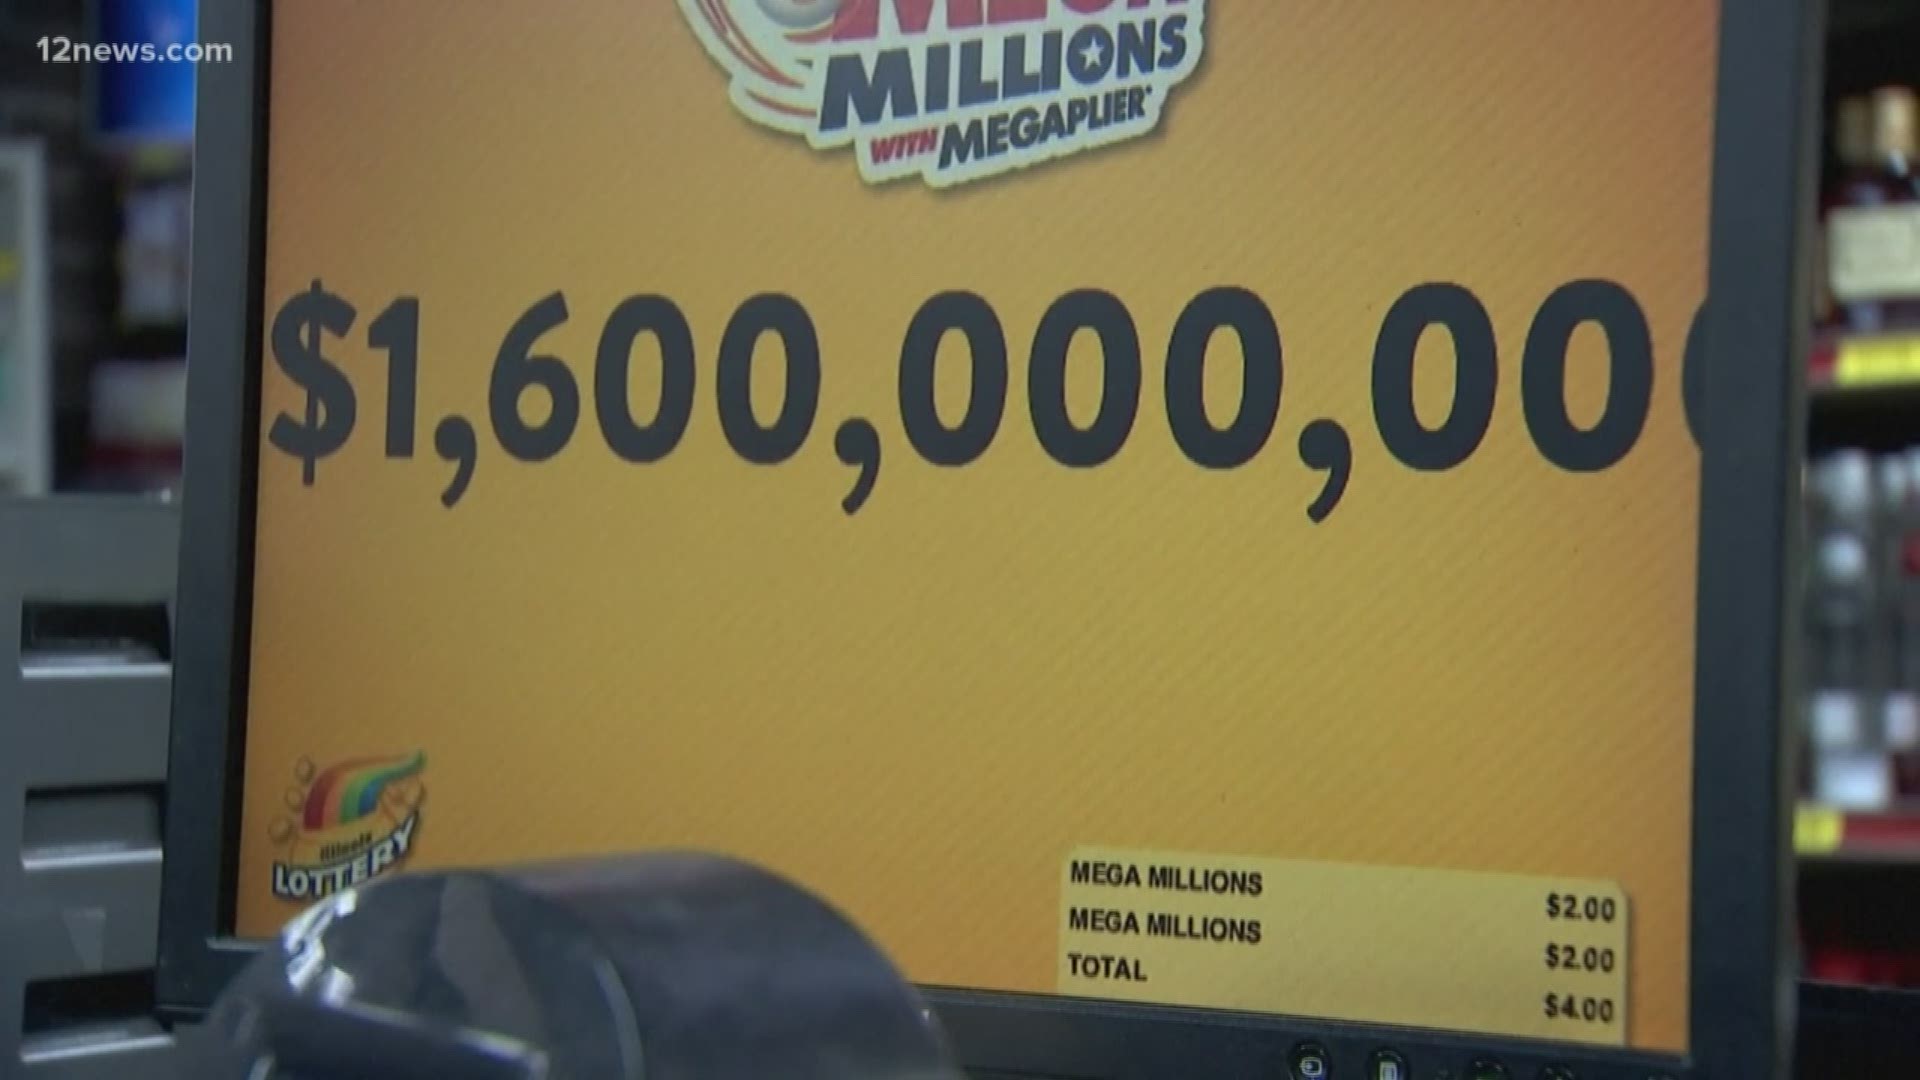 We all want to win the billion dollar jackpot, but it turns out you're a winner even if you don't get the jackpot. Part of the lottery sales go to programs that benefit all Arizonans.